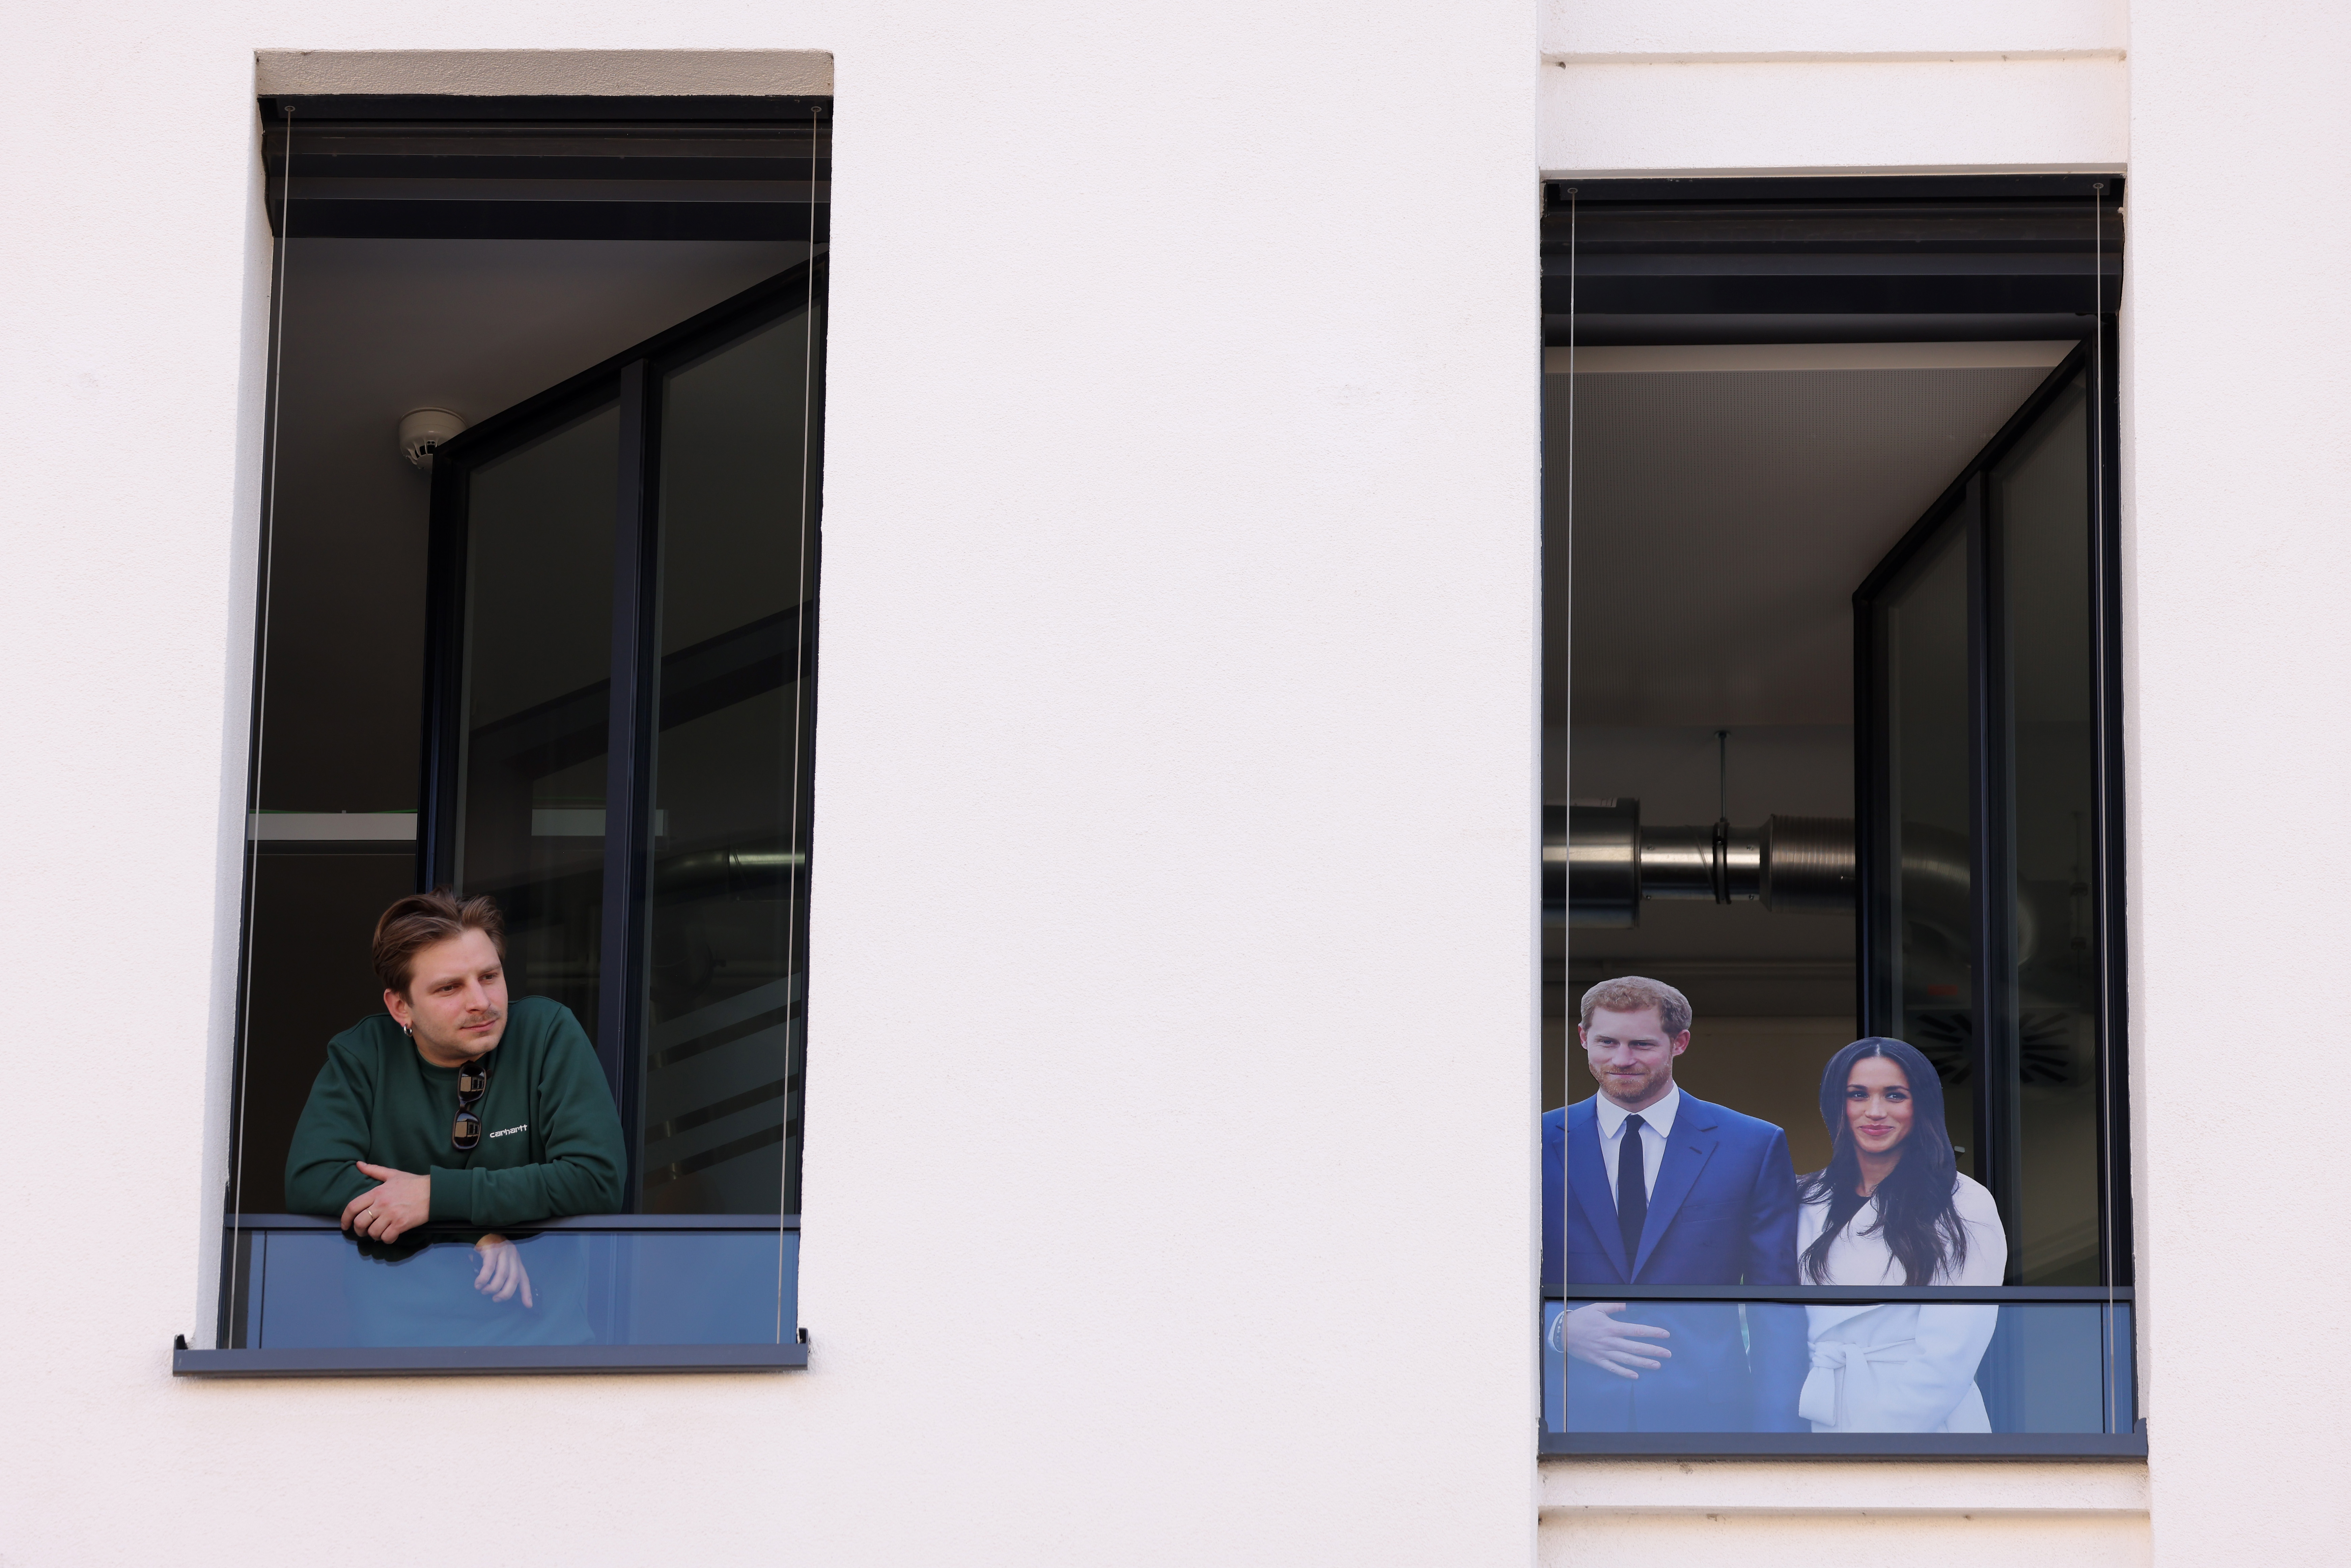 A spectator looks out of a window with a cut-out effigy of Prince Harry, Duke of Sussex and Meghan, Duchess of Sussex to see Camilla, Queen Consort in Komische Oper, on March 30, 2023 in Berlin, Germany. | Source: Getty Images